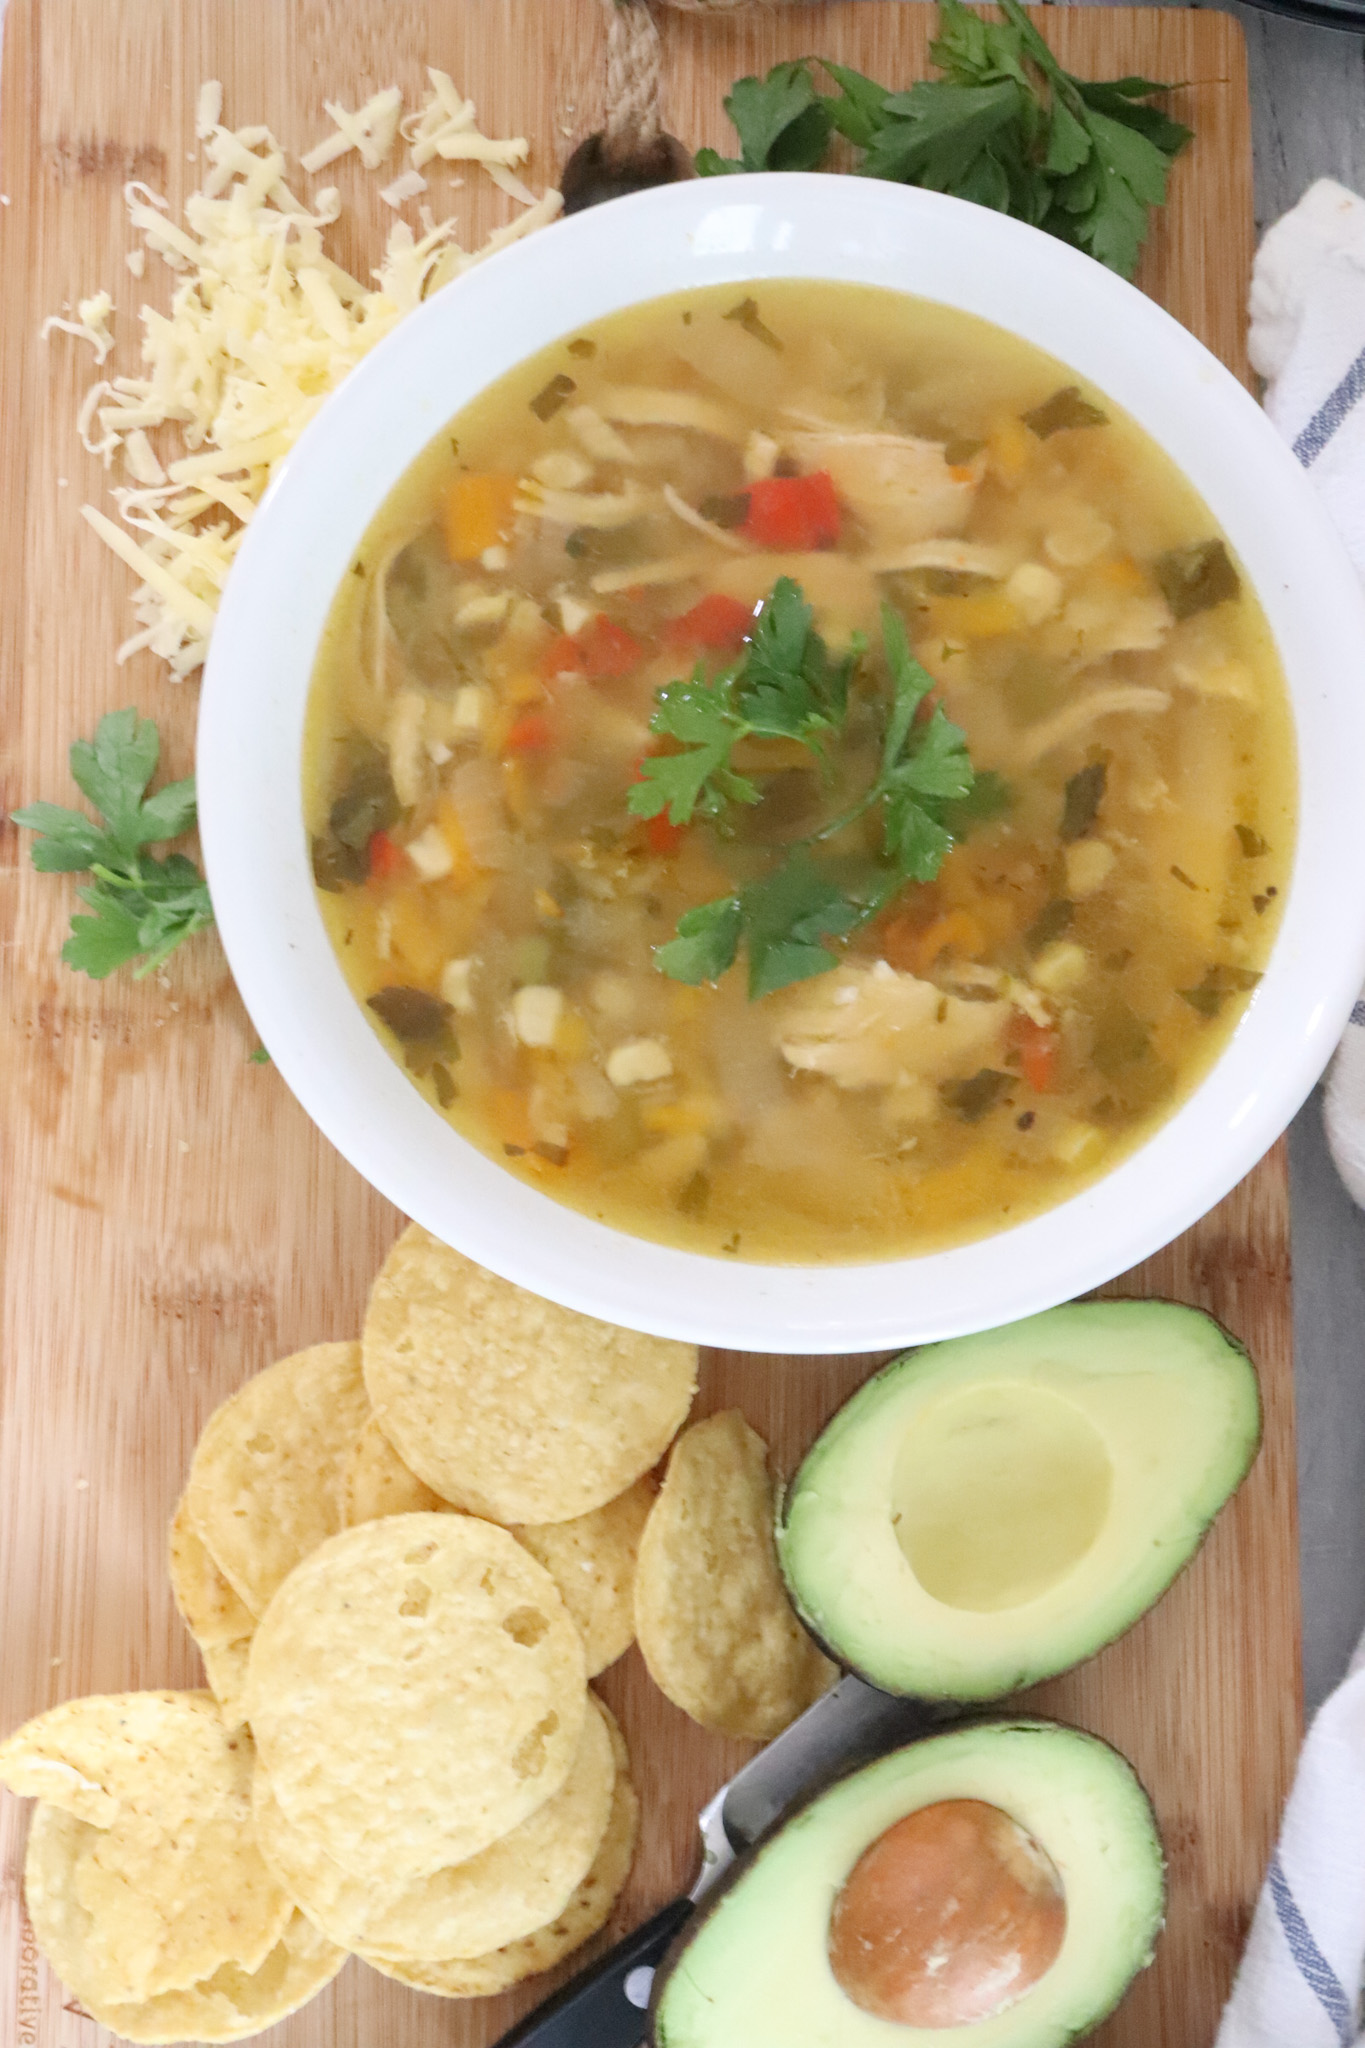 How to Make Tasty Chicken Tortilla Soup - The Duvall Homestead